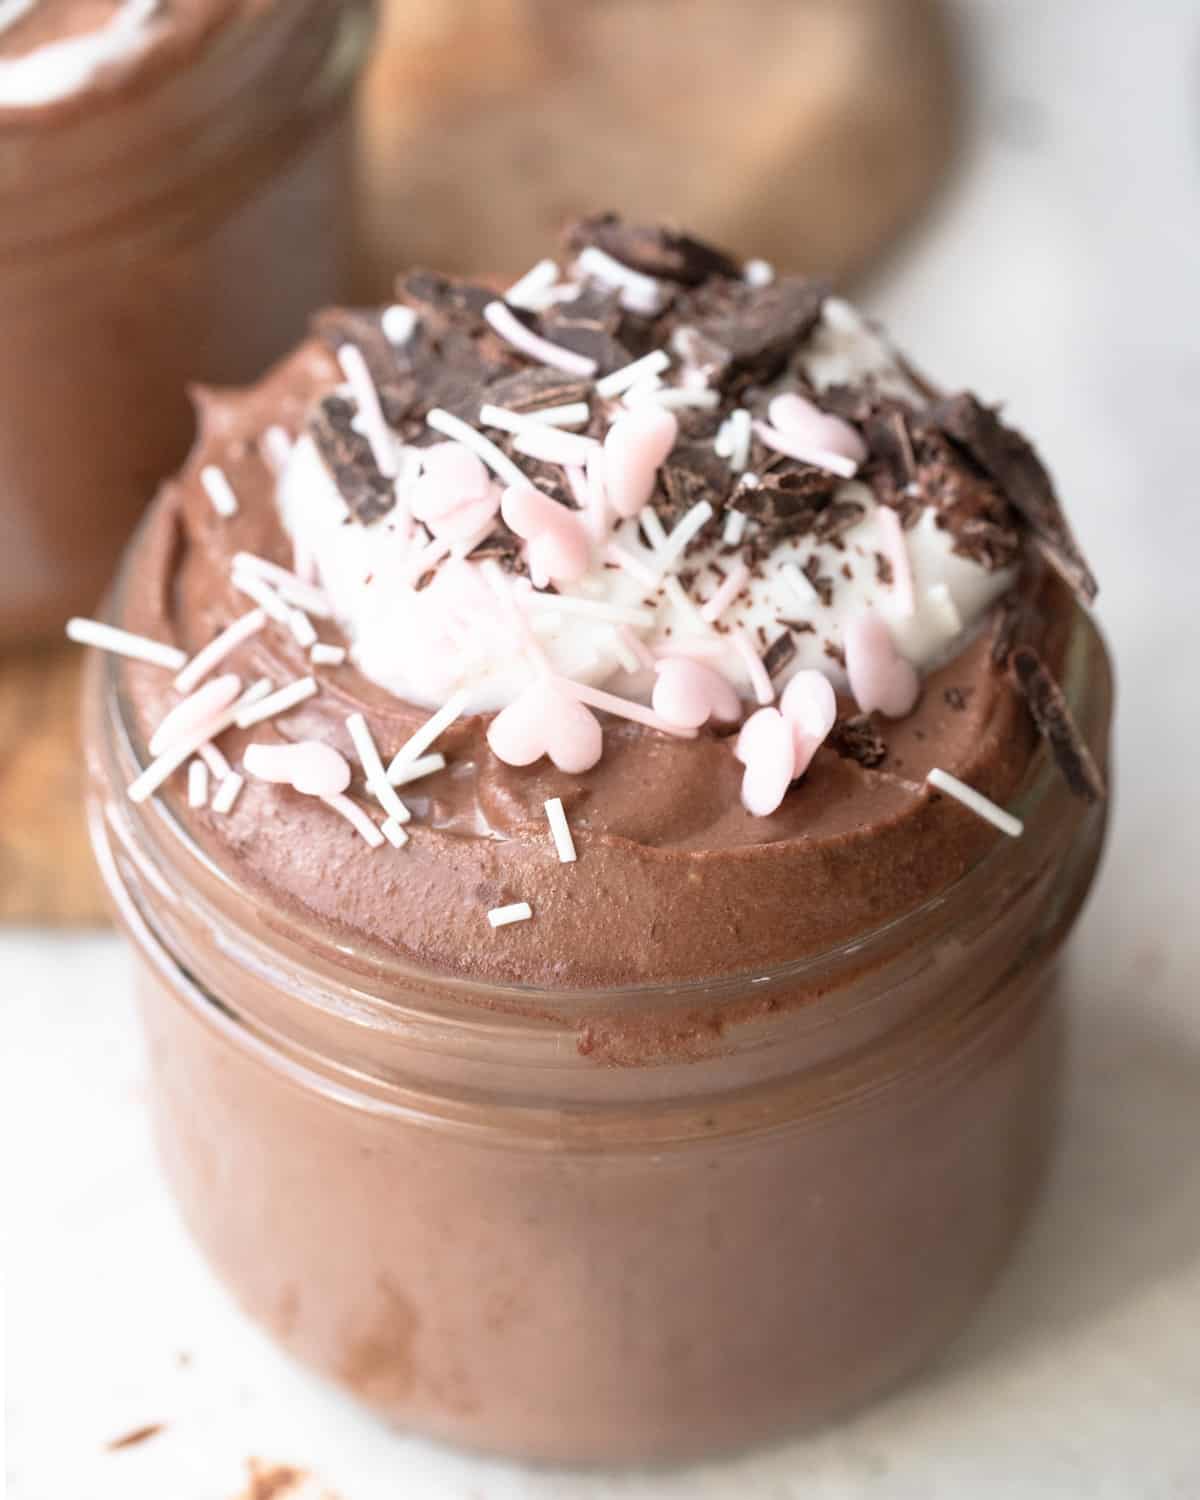 High Protein Chocolate Mousse in a glass jar, sprinkled with white and pink heart-shaped sprinkles and chocolate shavings for a festive touch.